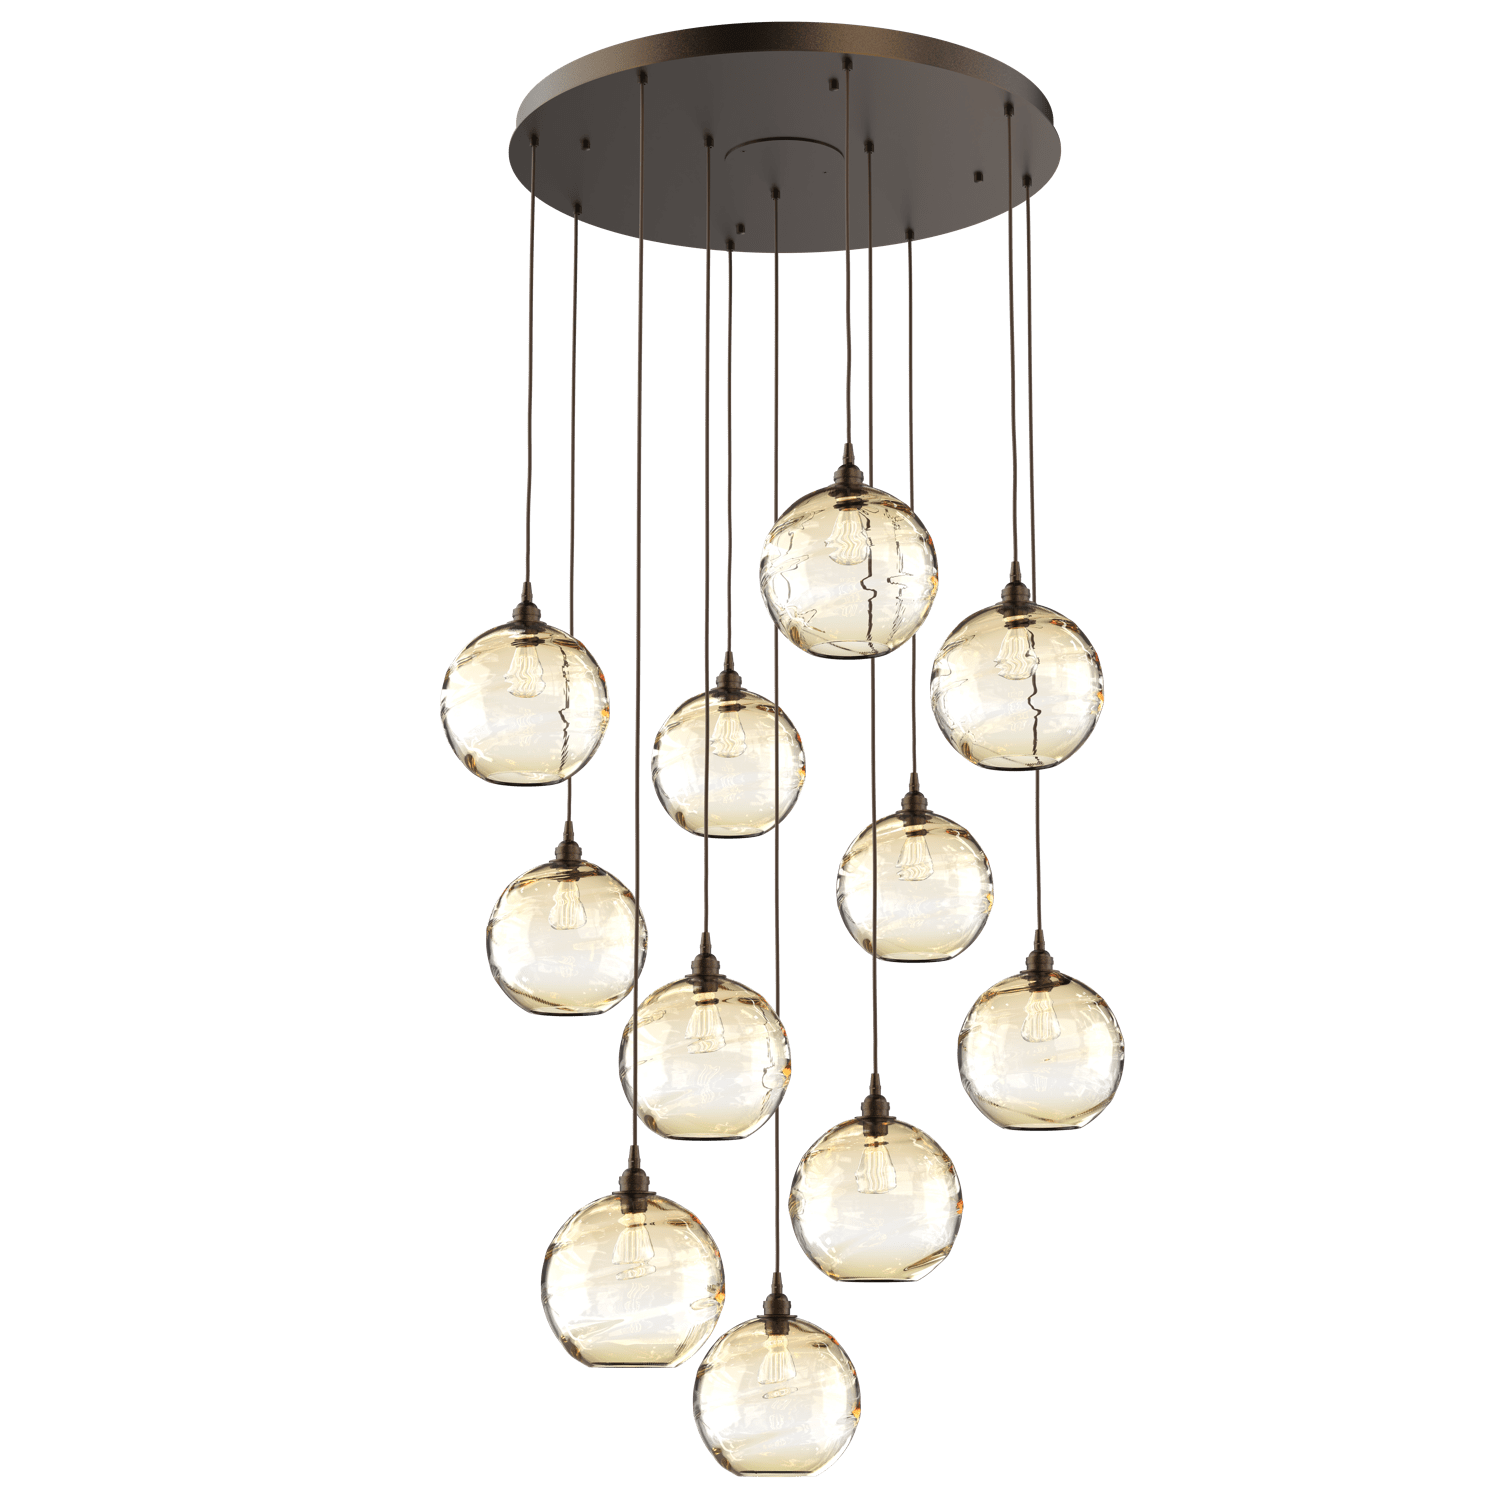 CHB0047-11-FB-OA-Hammerton-Studio-Optic-Blown-Glass-Terra-11-light-round-pendant-chandelier-with-flat-bronze-finish-and-optic-amber-blown-glass-shades-and-incandescent-lamping